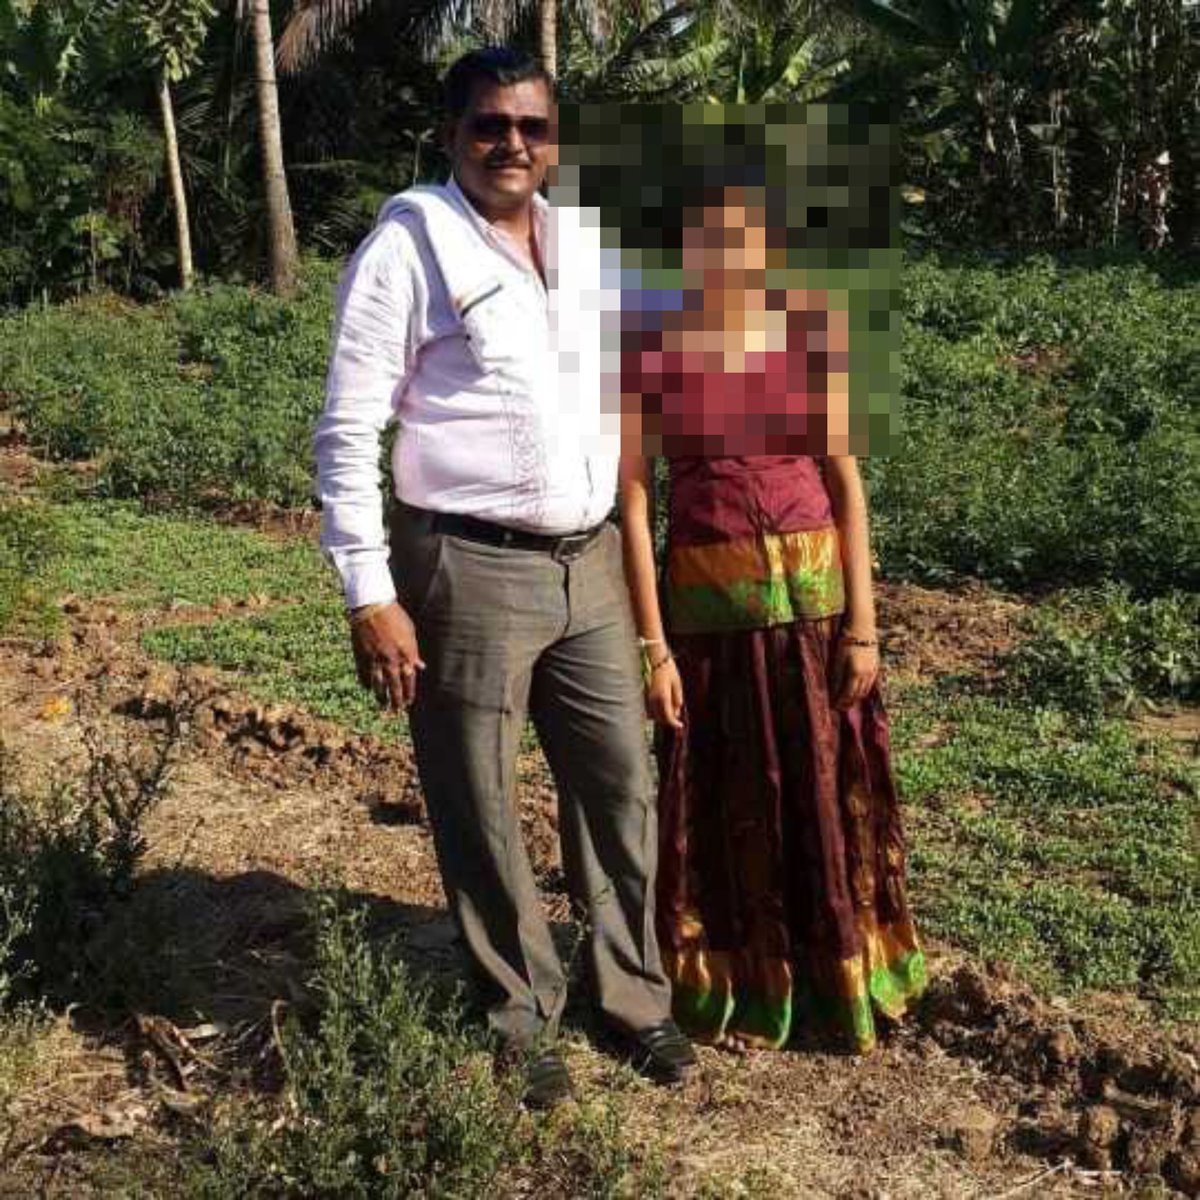 Neha Hiremath daughter of a Congress corporator in Hubli was brutally murdered in broad daylight by Fayaz inside her college.

You won't hear anything about it from Feminists, Liberals and LKFC.

And you know why.

P.S. Love Jihad is a figment of Hindu imagination.